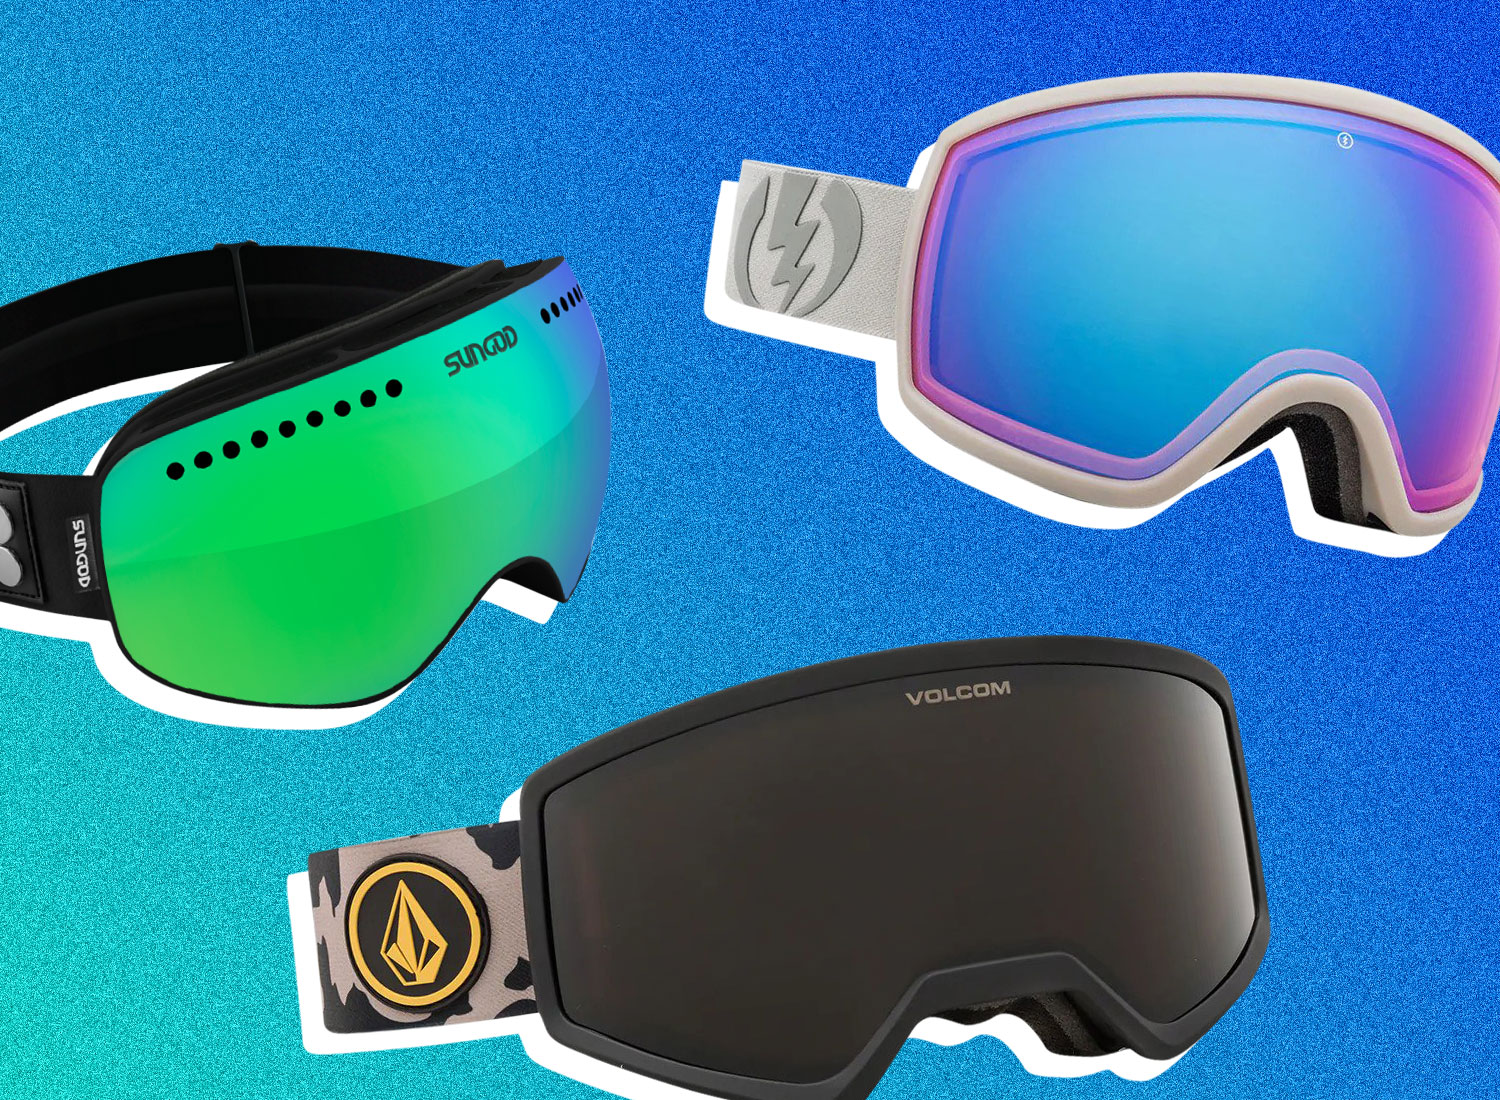 Dmarge Ski and Snowboard Goggles Featured Image 2023